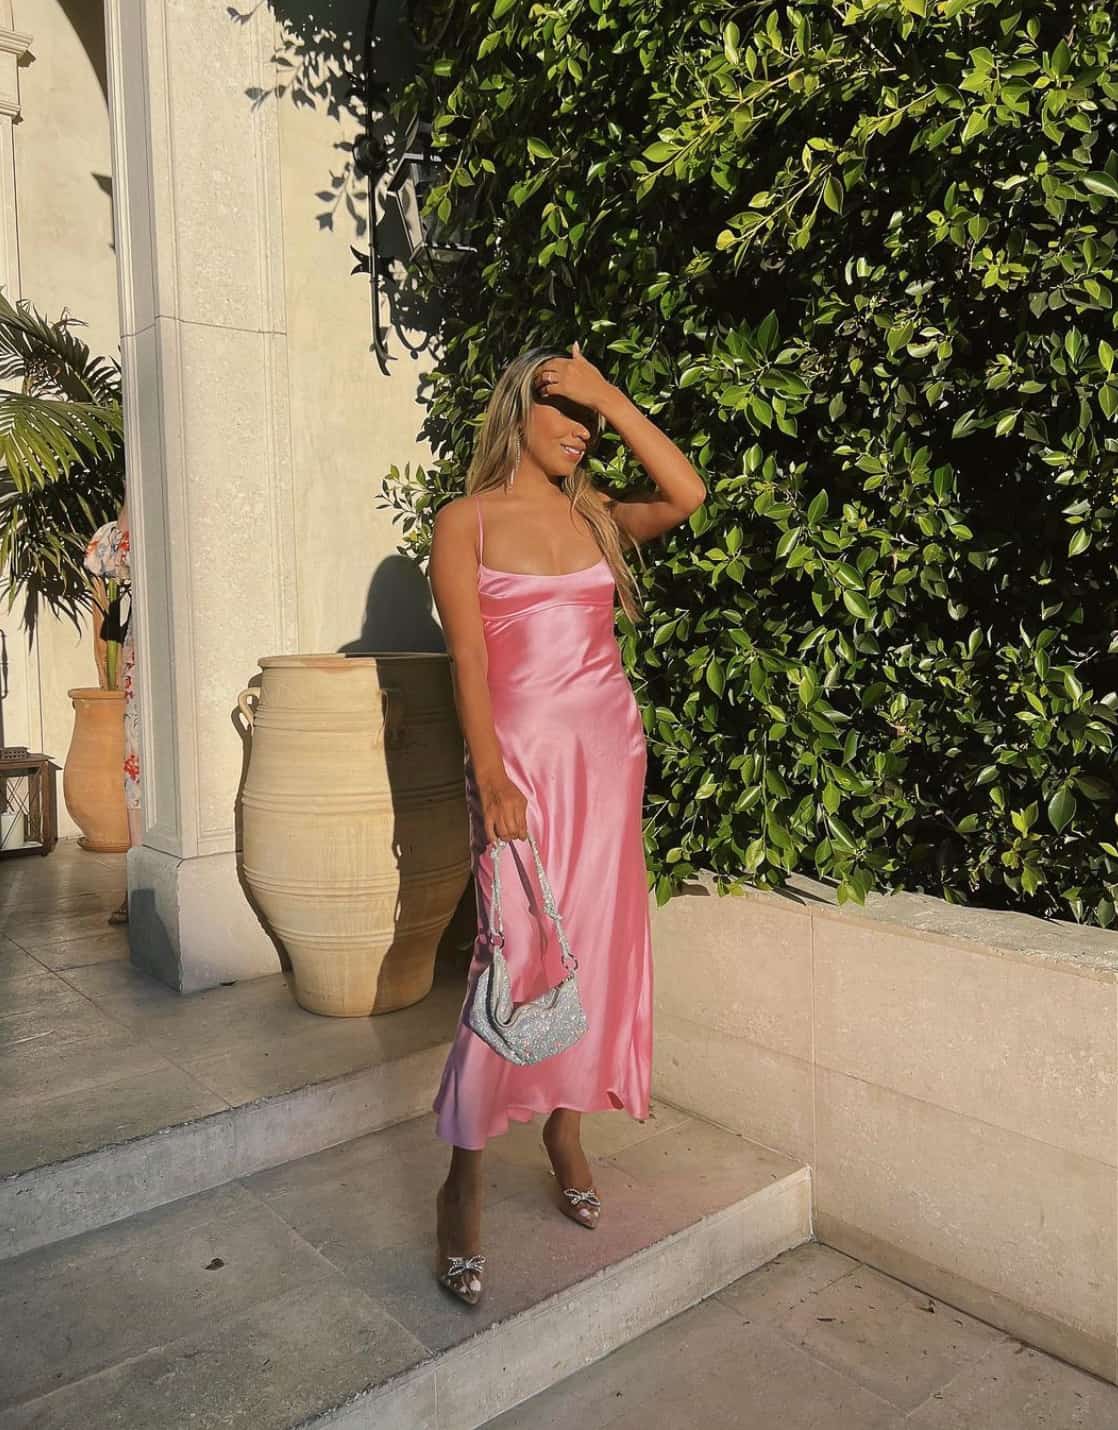 woman wearing a light pink slip dress with heeled sandals